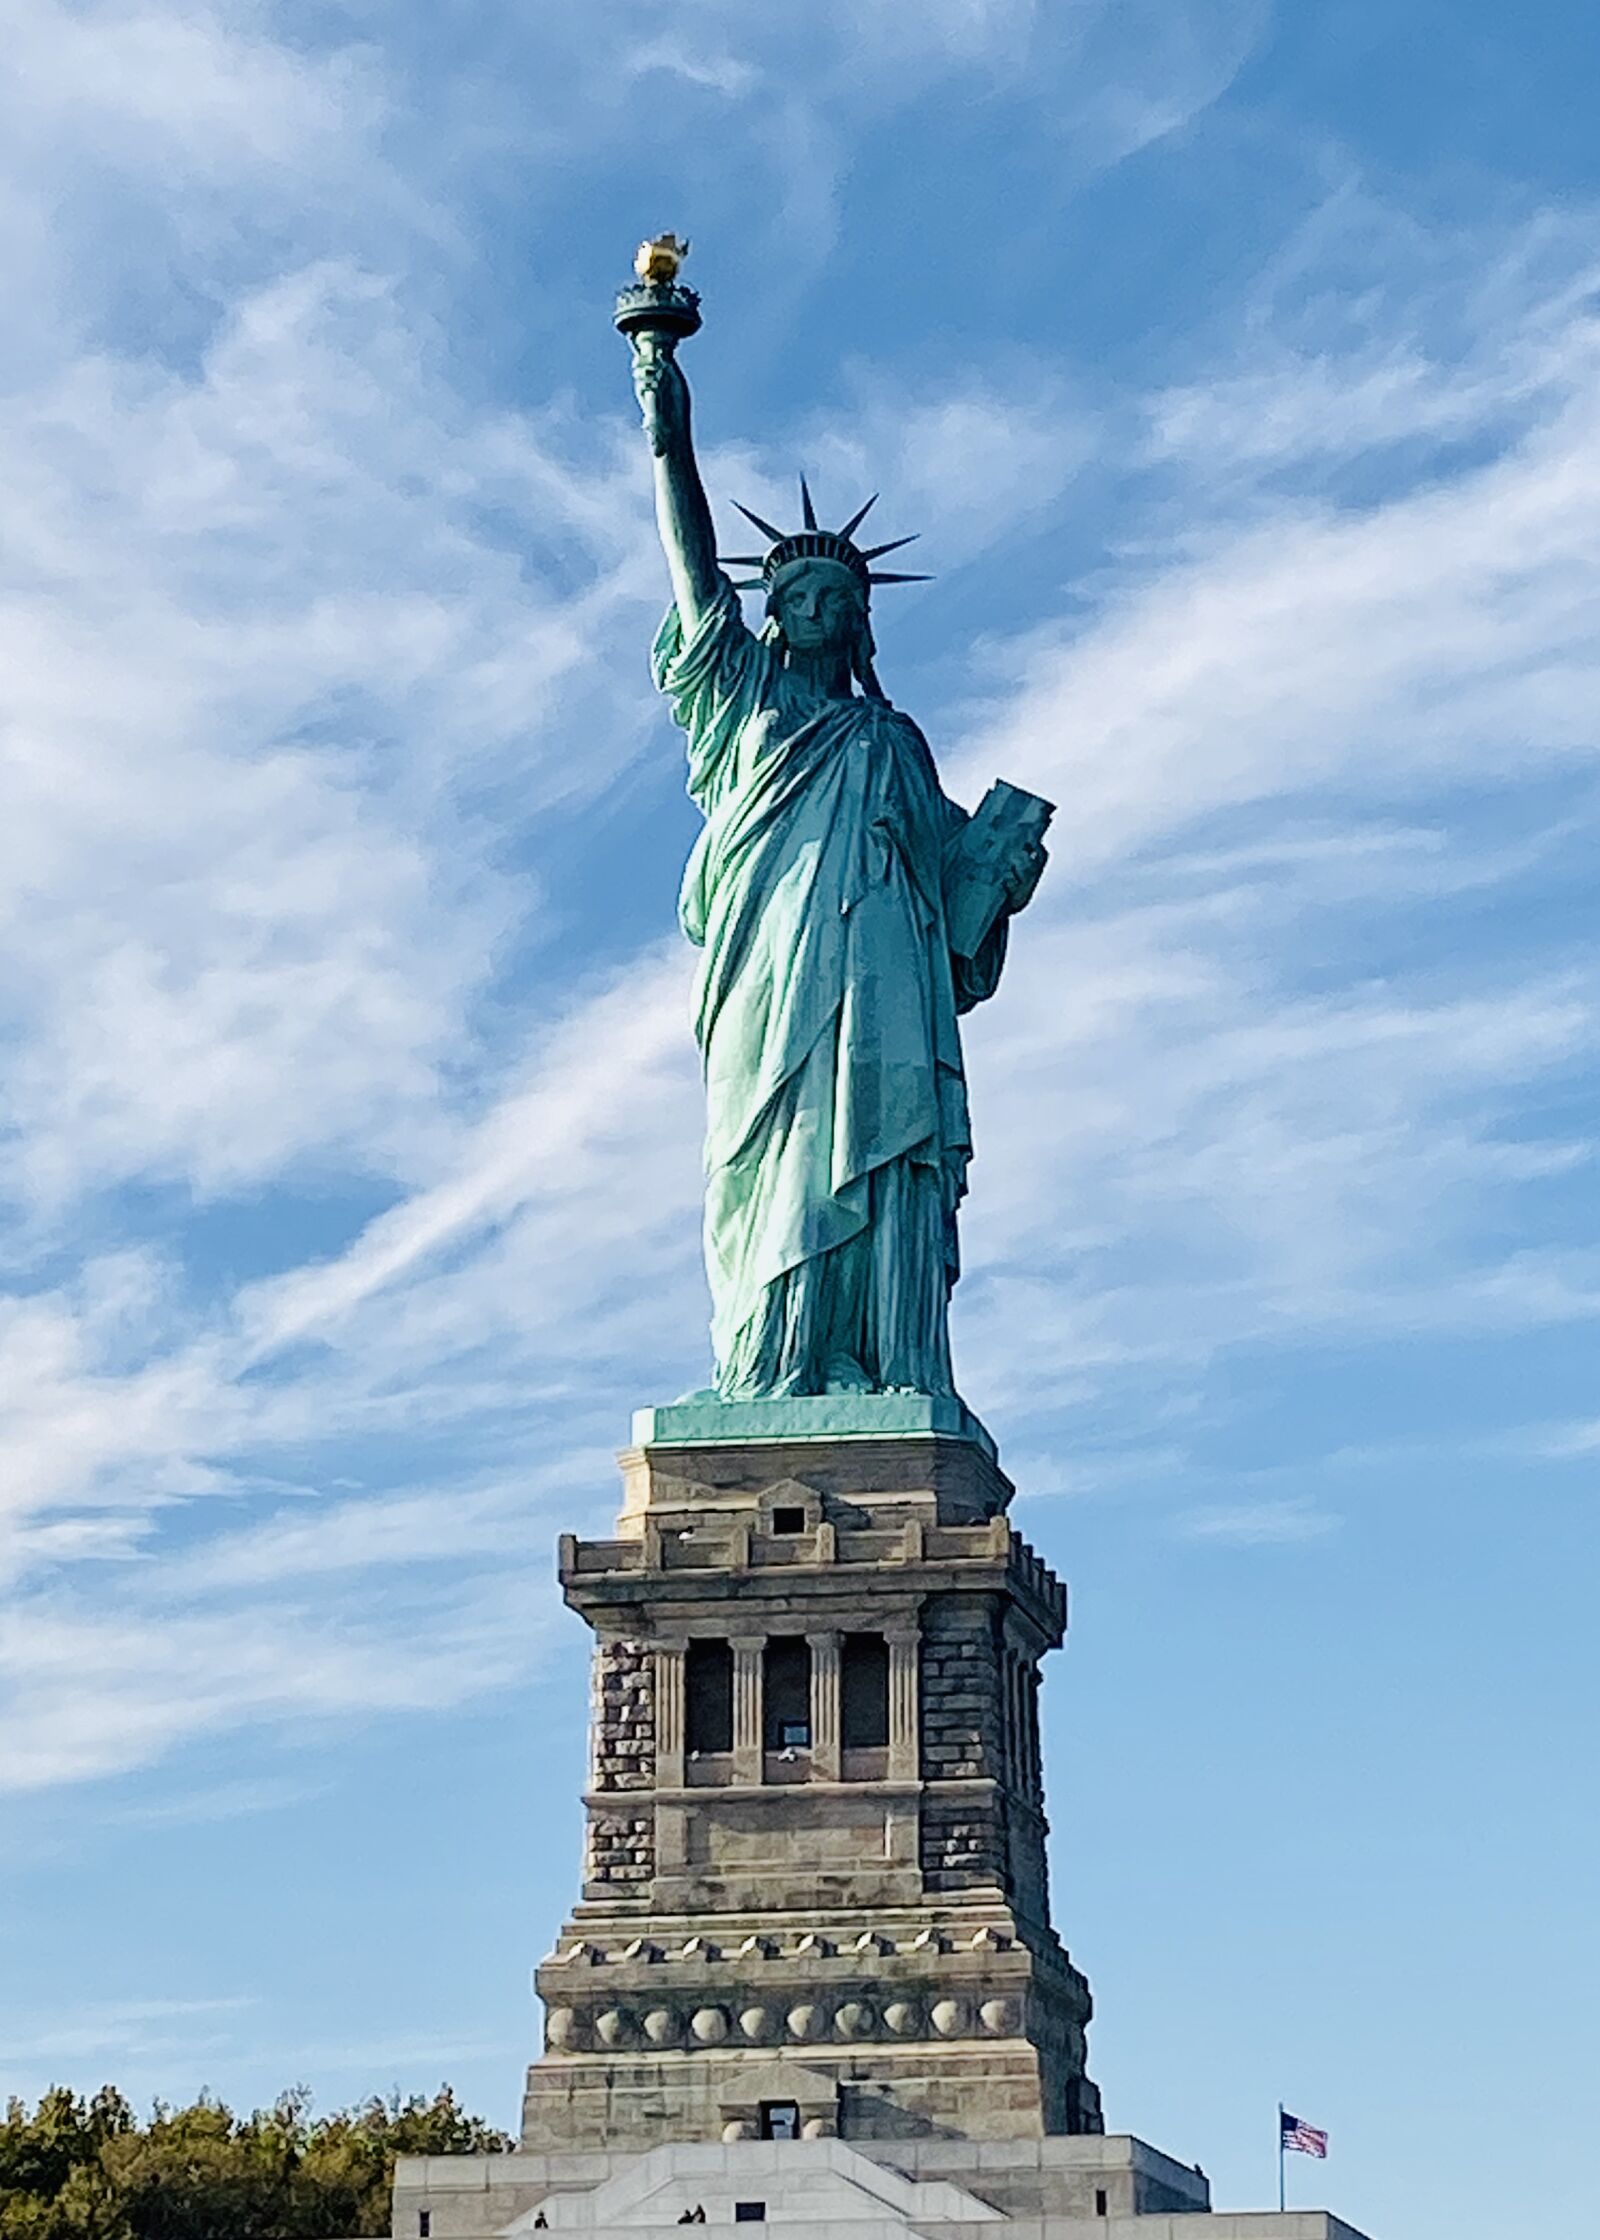 iPhone 11 back dual wide camera 4.25mm f/1.8 sample photo. Statue of liberty, nyc photography